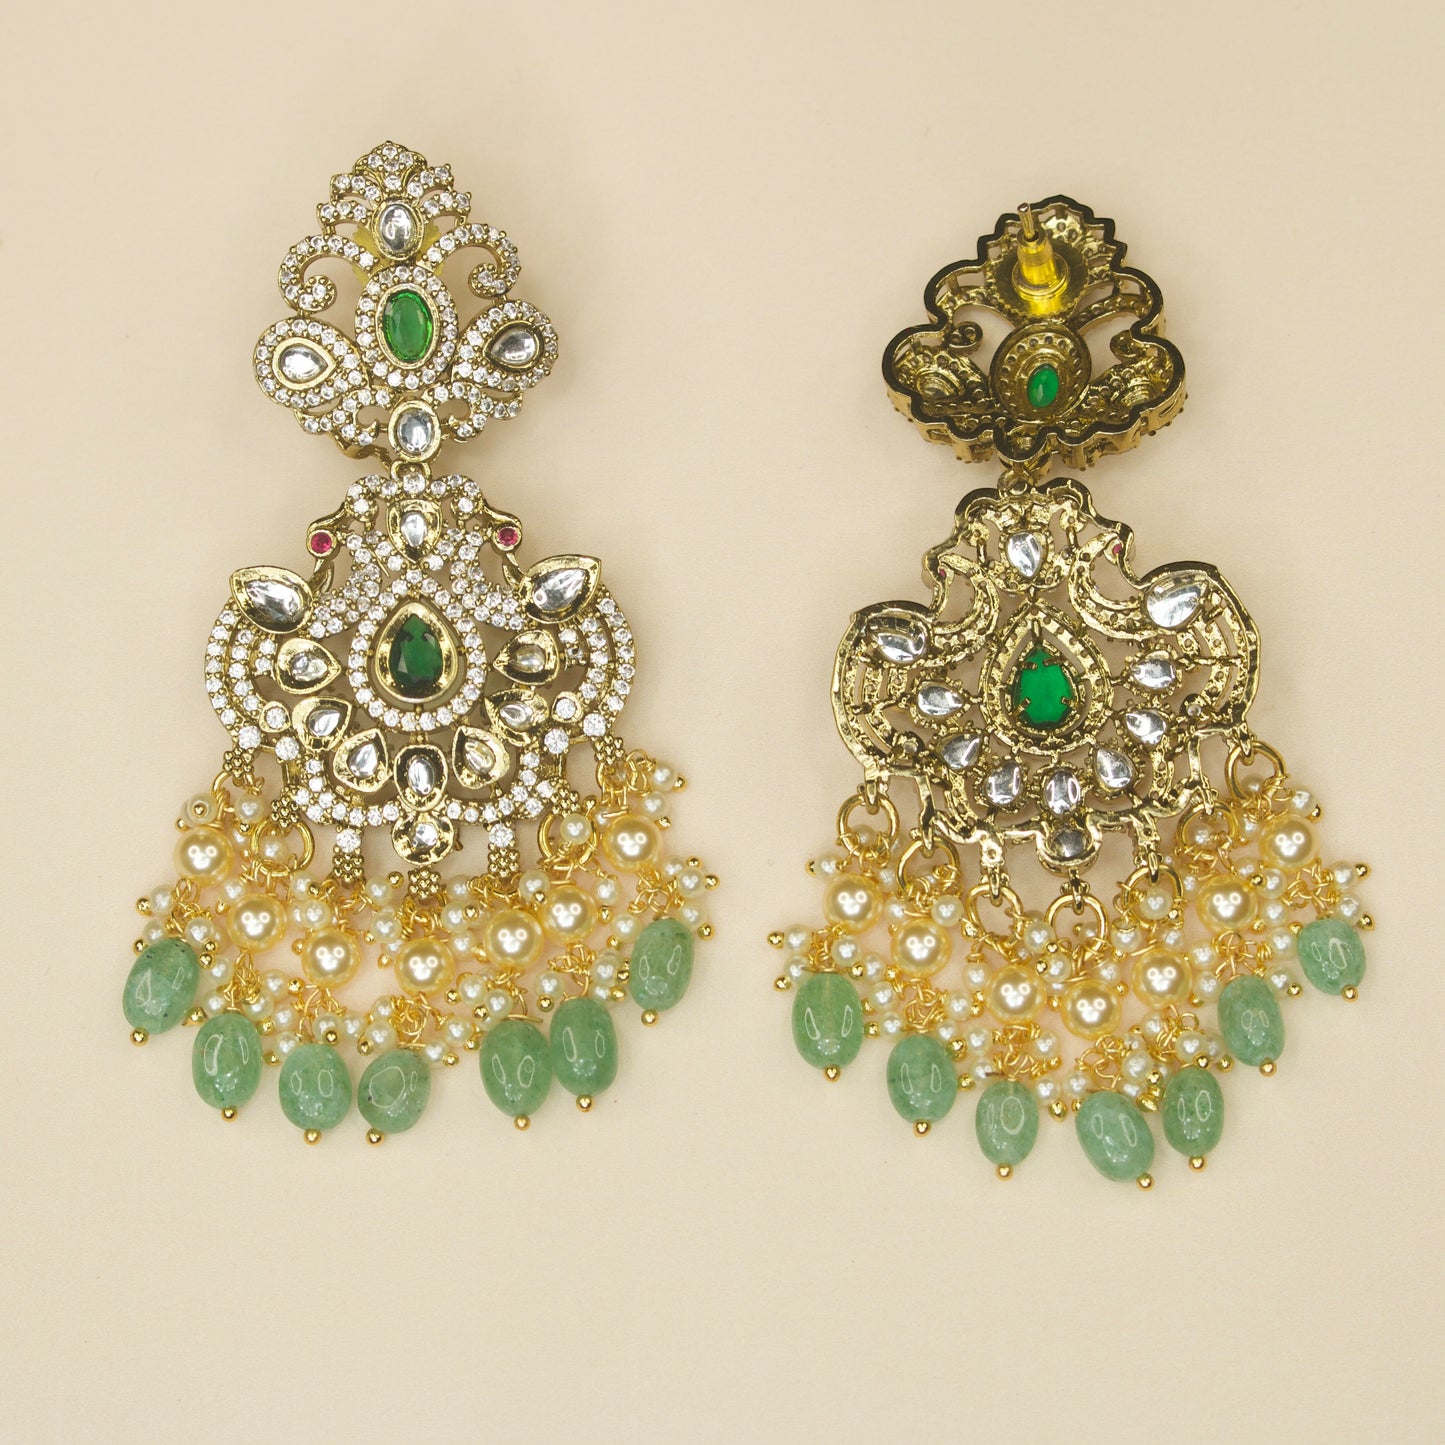 Elevating Victorian Kundan Necklace with Earrings